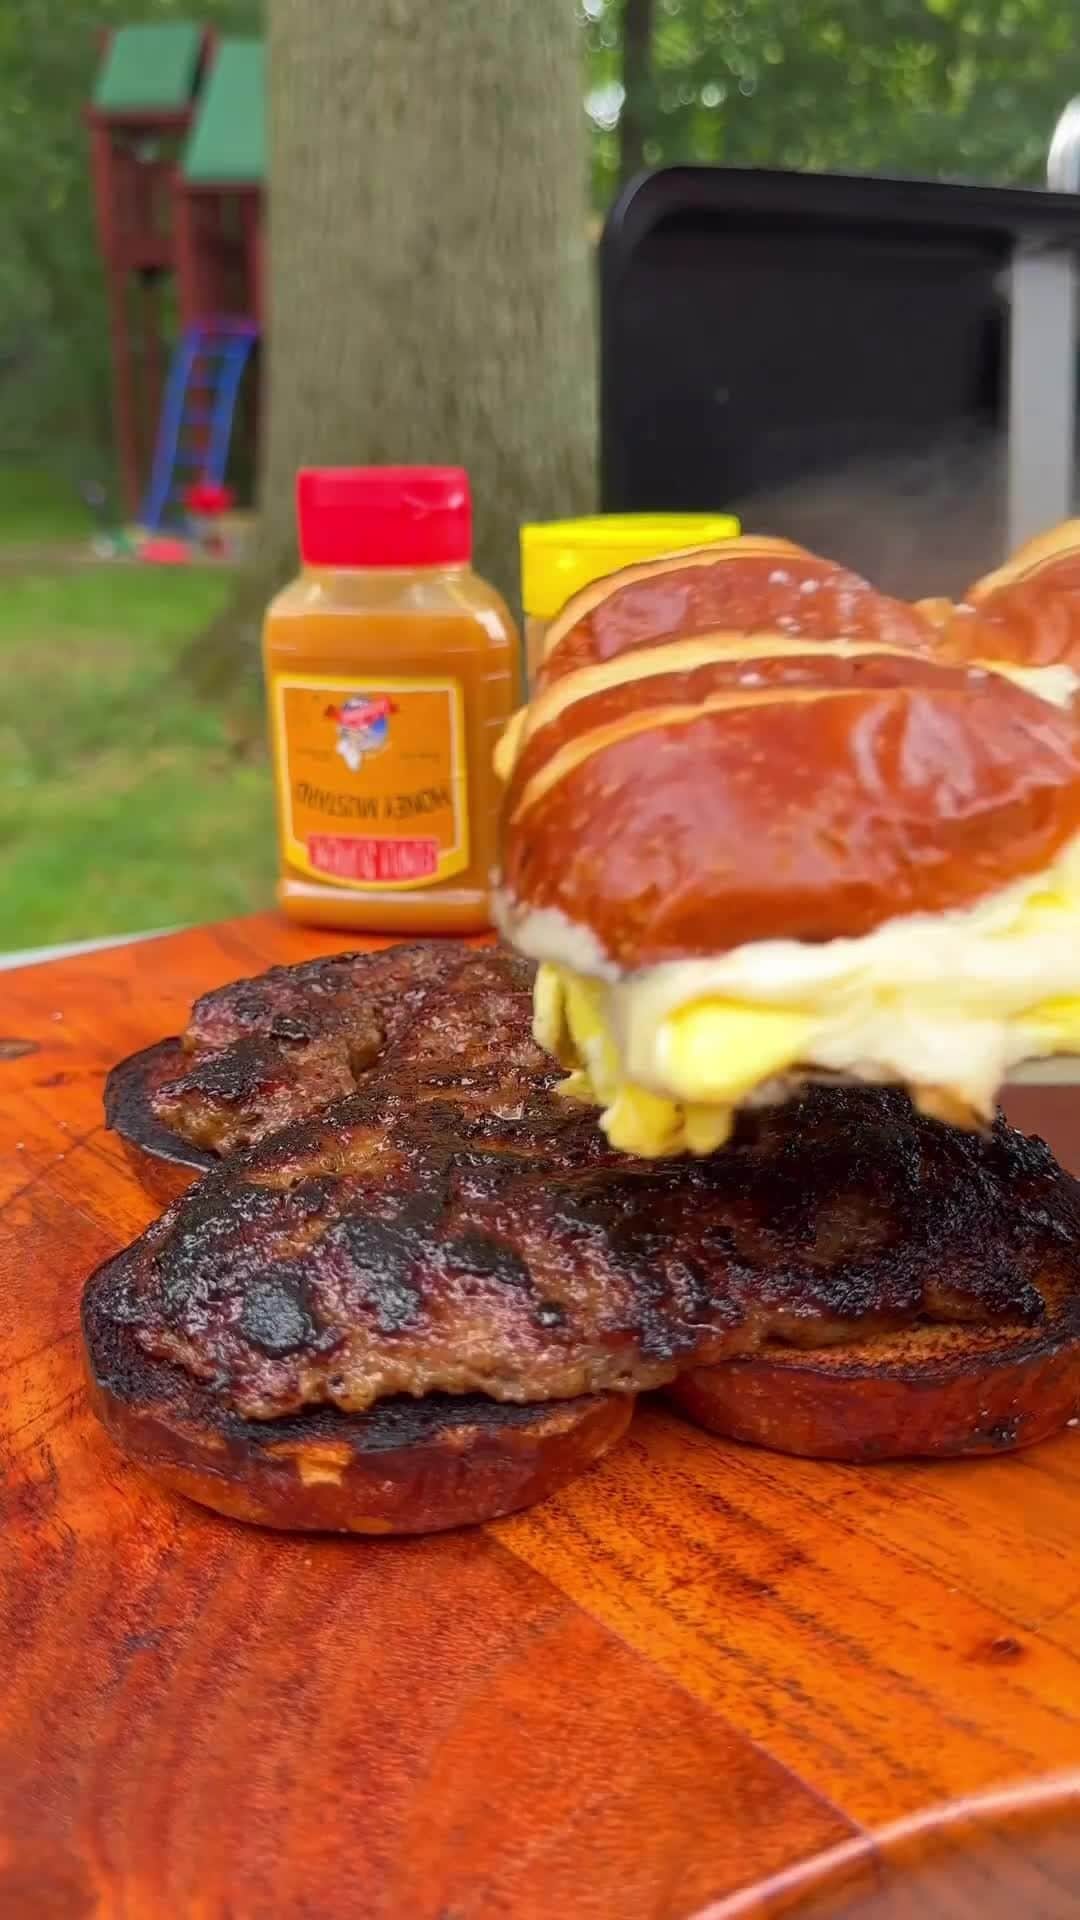 Flavorgod Seasoningsのインスタグラム：「Big Boy Breakfast Sliders by Customer:➡ @cookingwithcarrrl Seasoned with:➡ #Flavorgod Buttery Cinnamon Roll!🔥⁠ -⁠ Add delicious flavors to your meals!⬇️⁠ Click link in the bio -> @flavorgod | www.flavorgod.com⁠ -⁠ "Maple sausage covered with @flavorgod Buttery Cinnamon Roll & griddled up! The sugars in the seasoning caramelized too quickly & I’ll cook these at a lower temp next time, but the flavor was spot on. Full recipe up tomorrow!" 🔥🔥🔥⁠ -⁠ FlavorGod Seasonings:⁠ 🌿Made Fresh⁠ ☀️Gluten free⁠ 🥑Paleo⁠ ☀️KOSHER⁠ 🌊Low salt⁠ ⚡️NO MSG⁠ 🚫NO SOY⁠ ⏰Shelf life is 24 months⁠ -⁠ #breakfast #fitness #food #foodporn #foodie #instafood #foodphotography #foodstagram #yummy #instagood  #foodies #tasty #cooking #instadaily #lunch #healthy #seasonings #flavorgod #lowsodium #glutenfree #dairyfree」